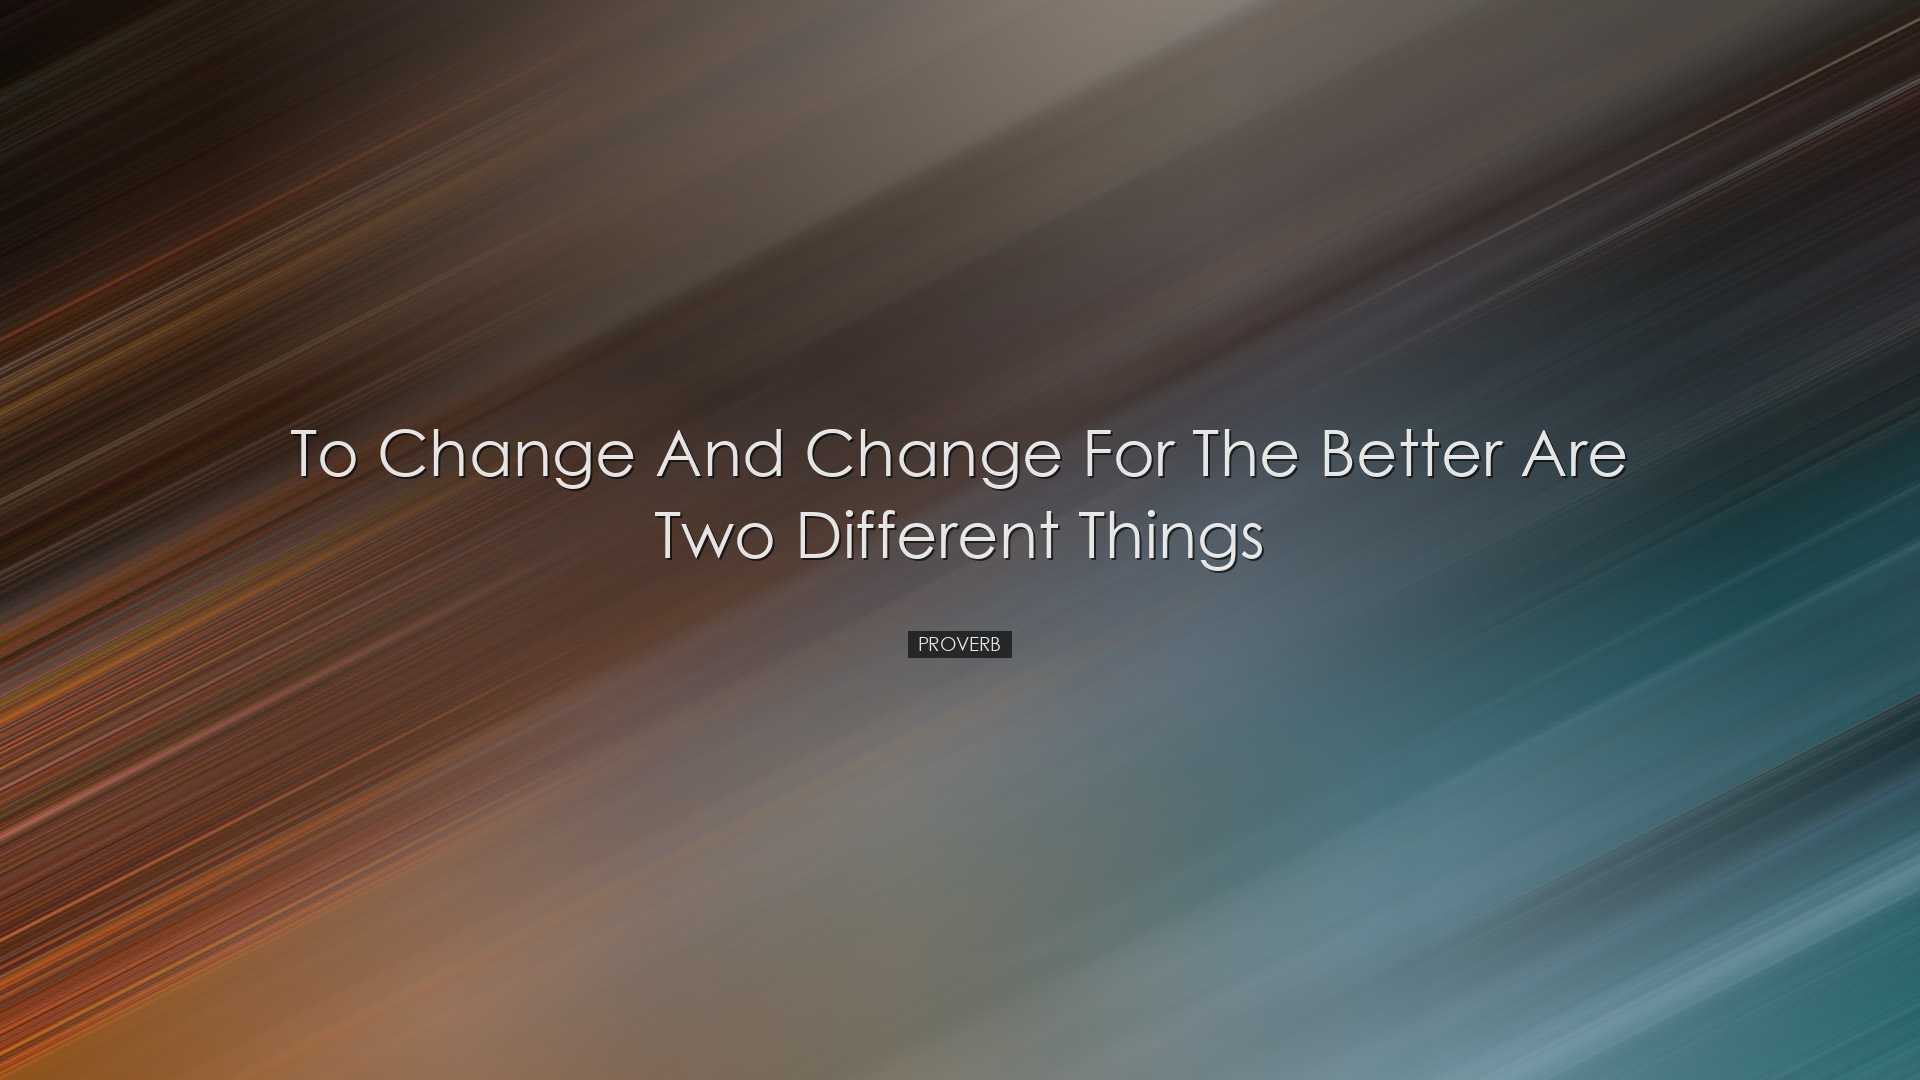 To change and change for the better are two different things - Pro